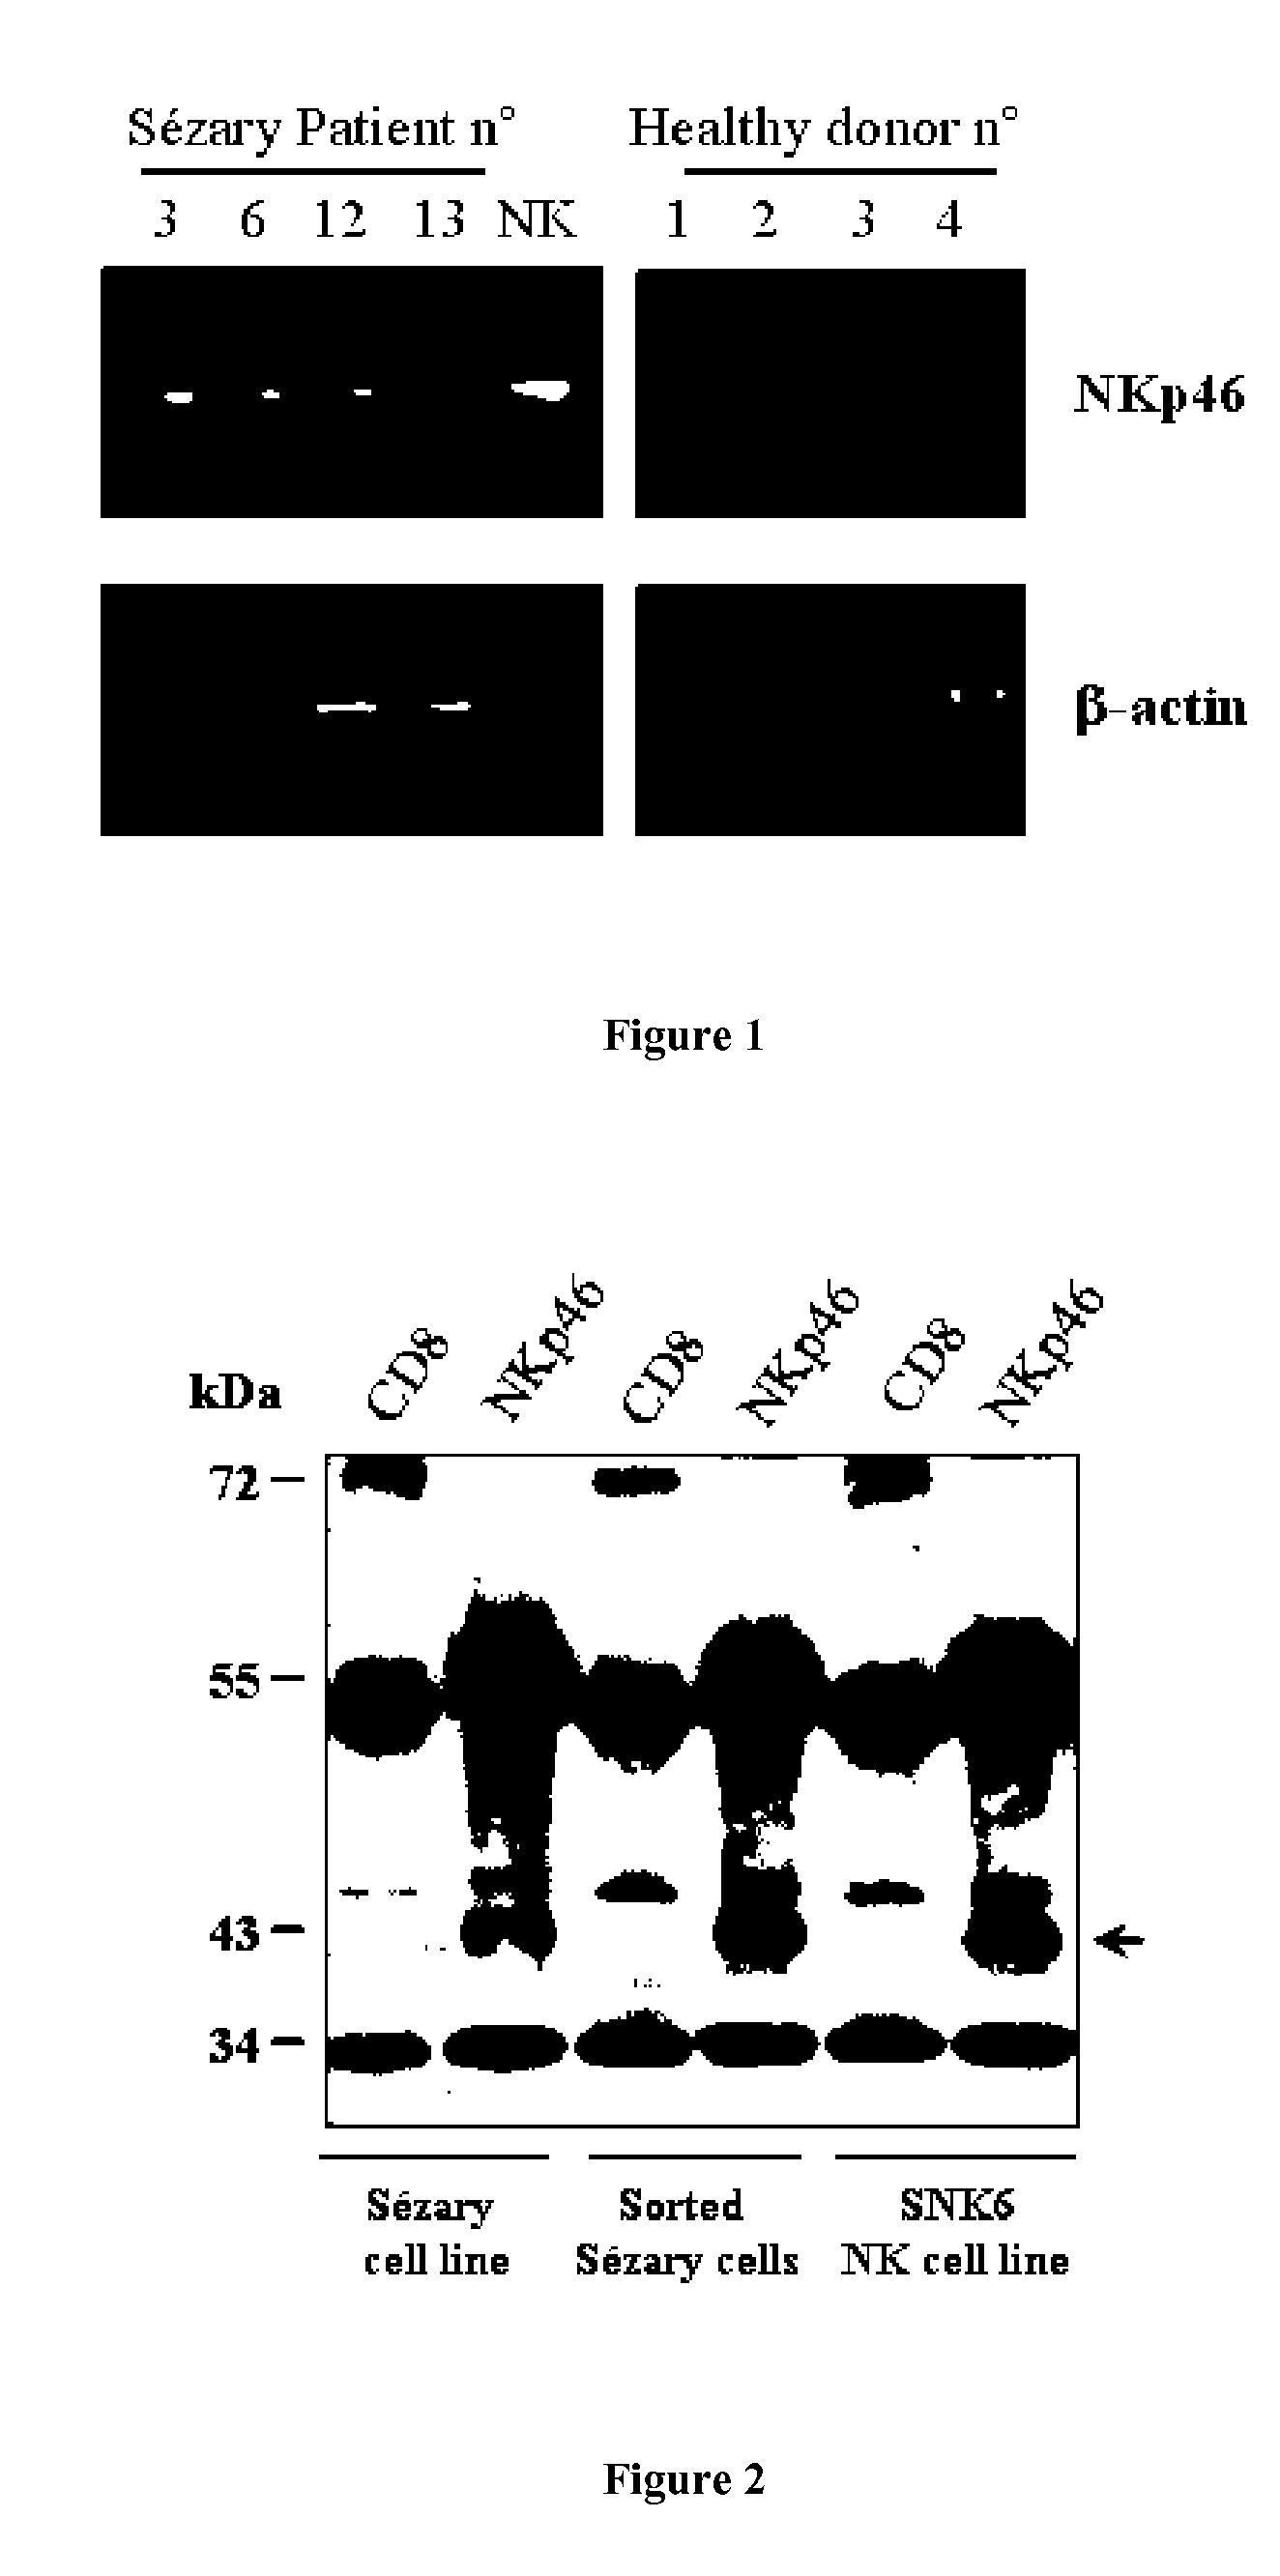 Methods for diagnosis and treatment of cutaneous t cell lymphomas